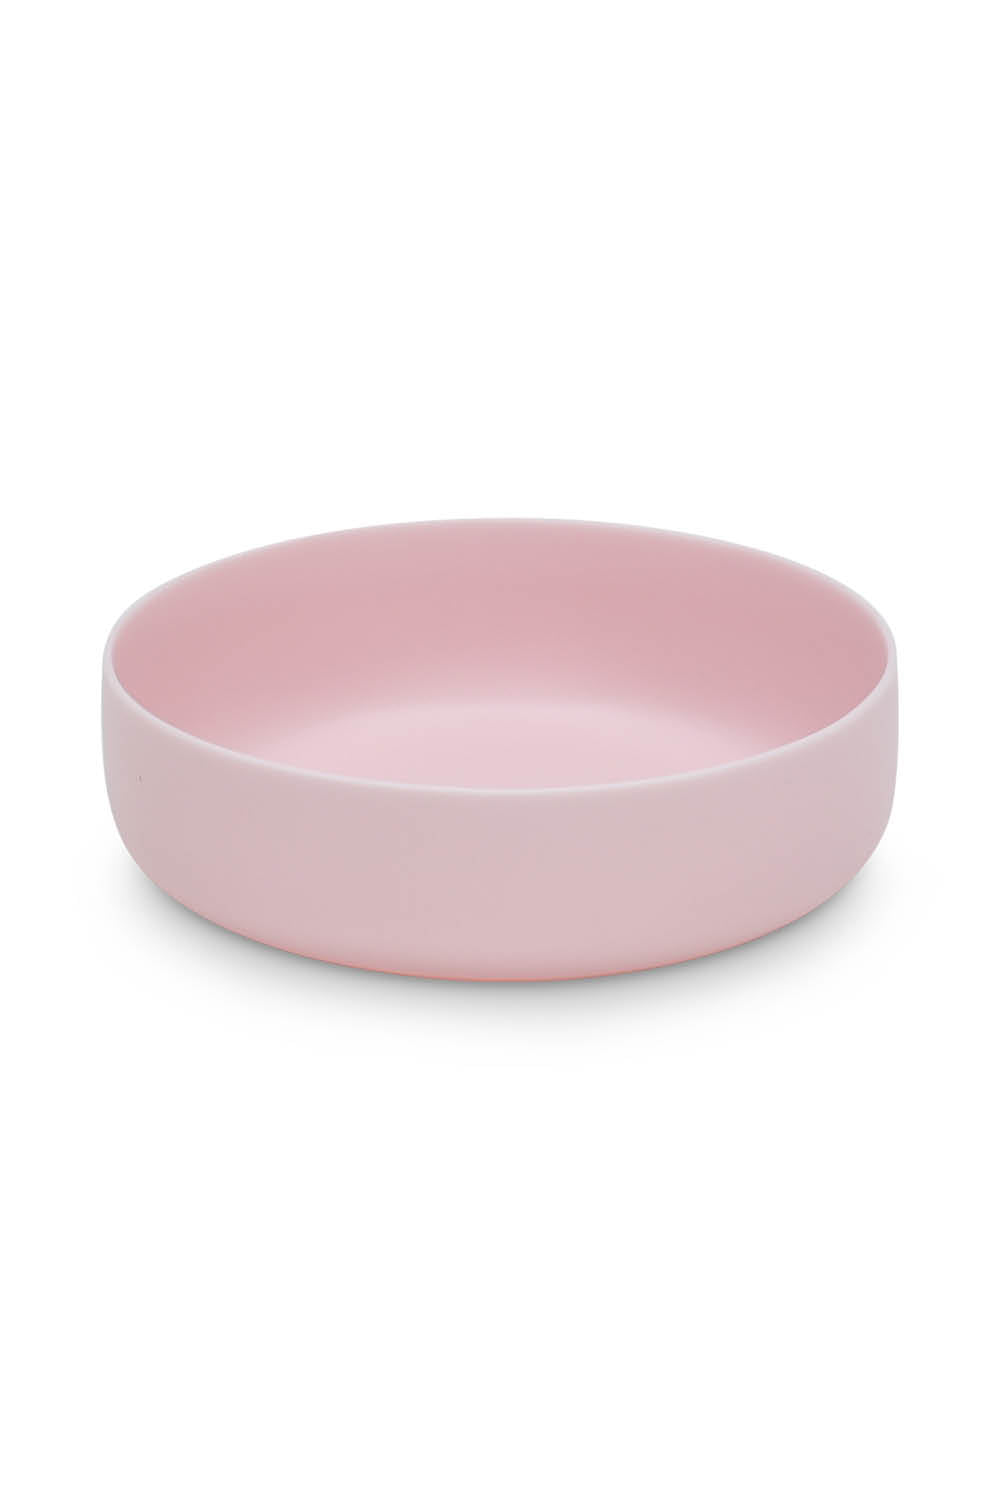 MODERN Extra Large Bowl in Pale Rose